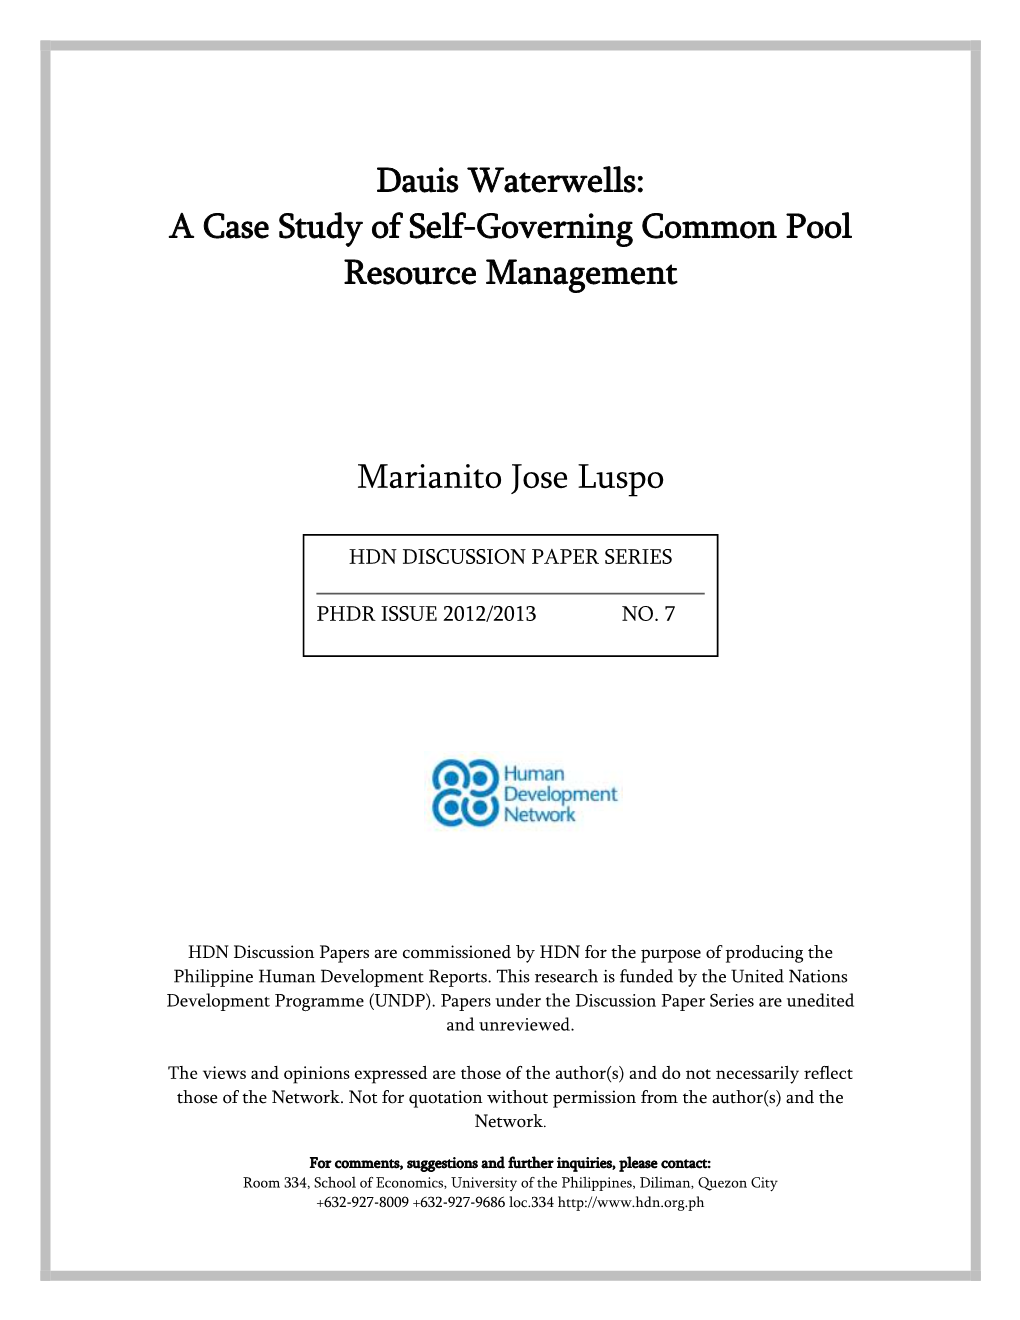 Dauis Waterwells: a Case Study of Self-Governing Common Pool Resource Management